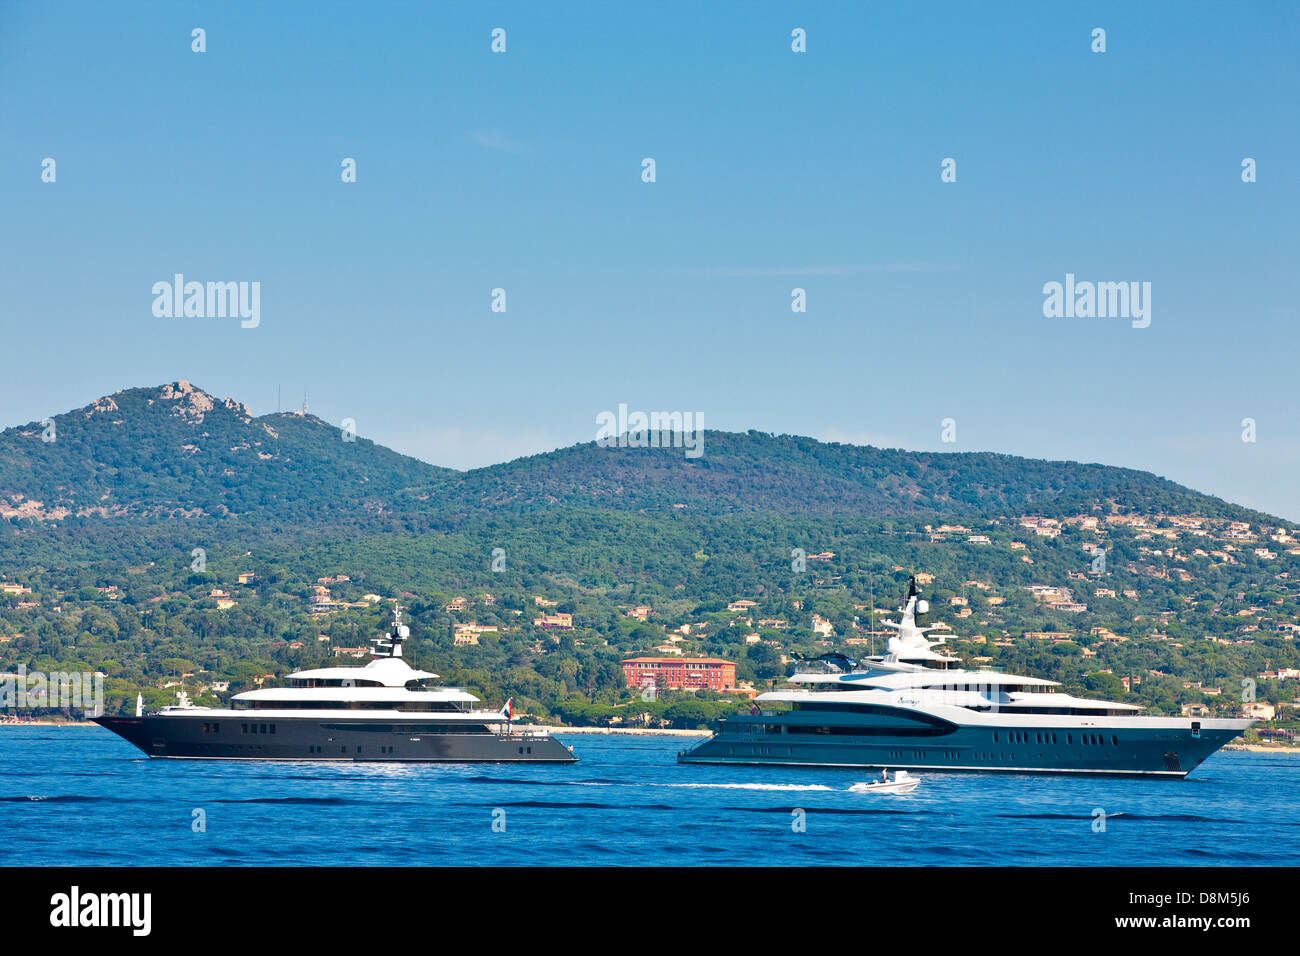 Luxurious yachts at the bay of Saint Tropez, France Stock Photo